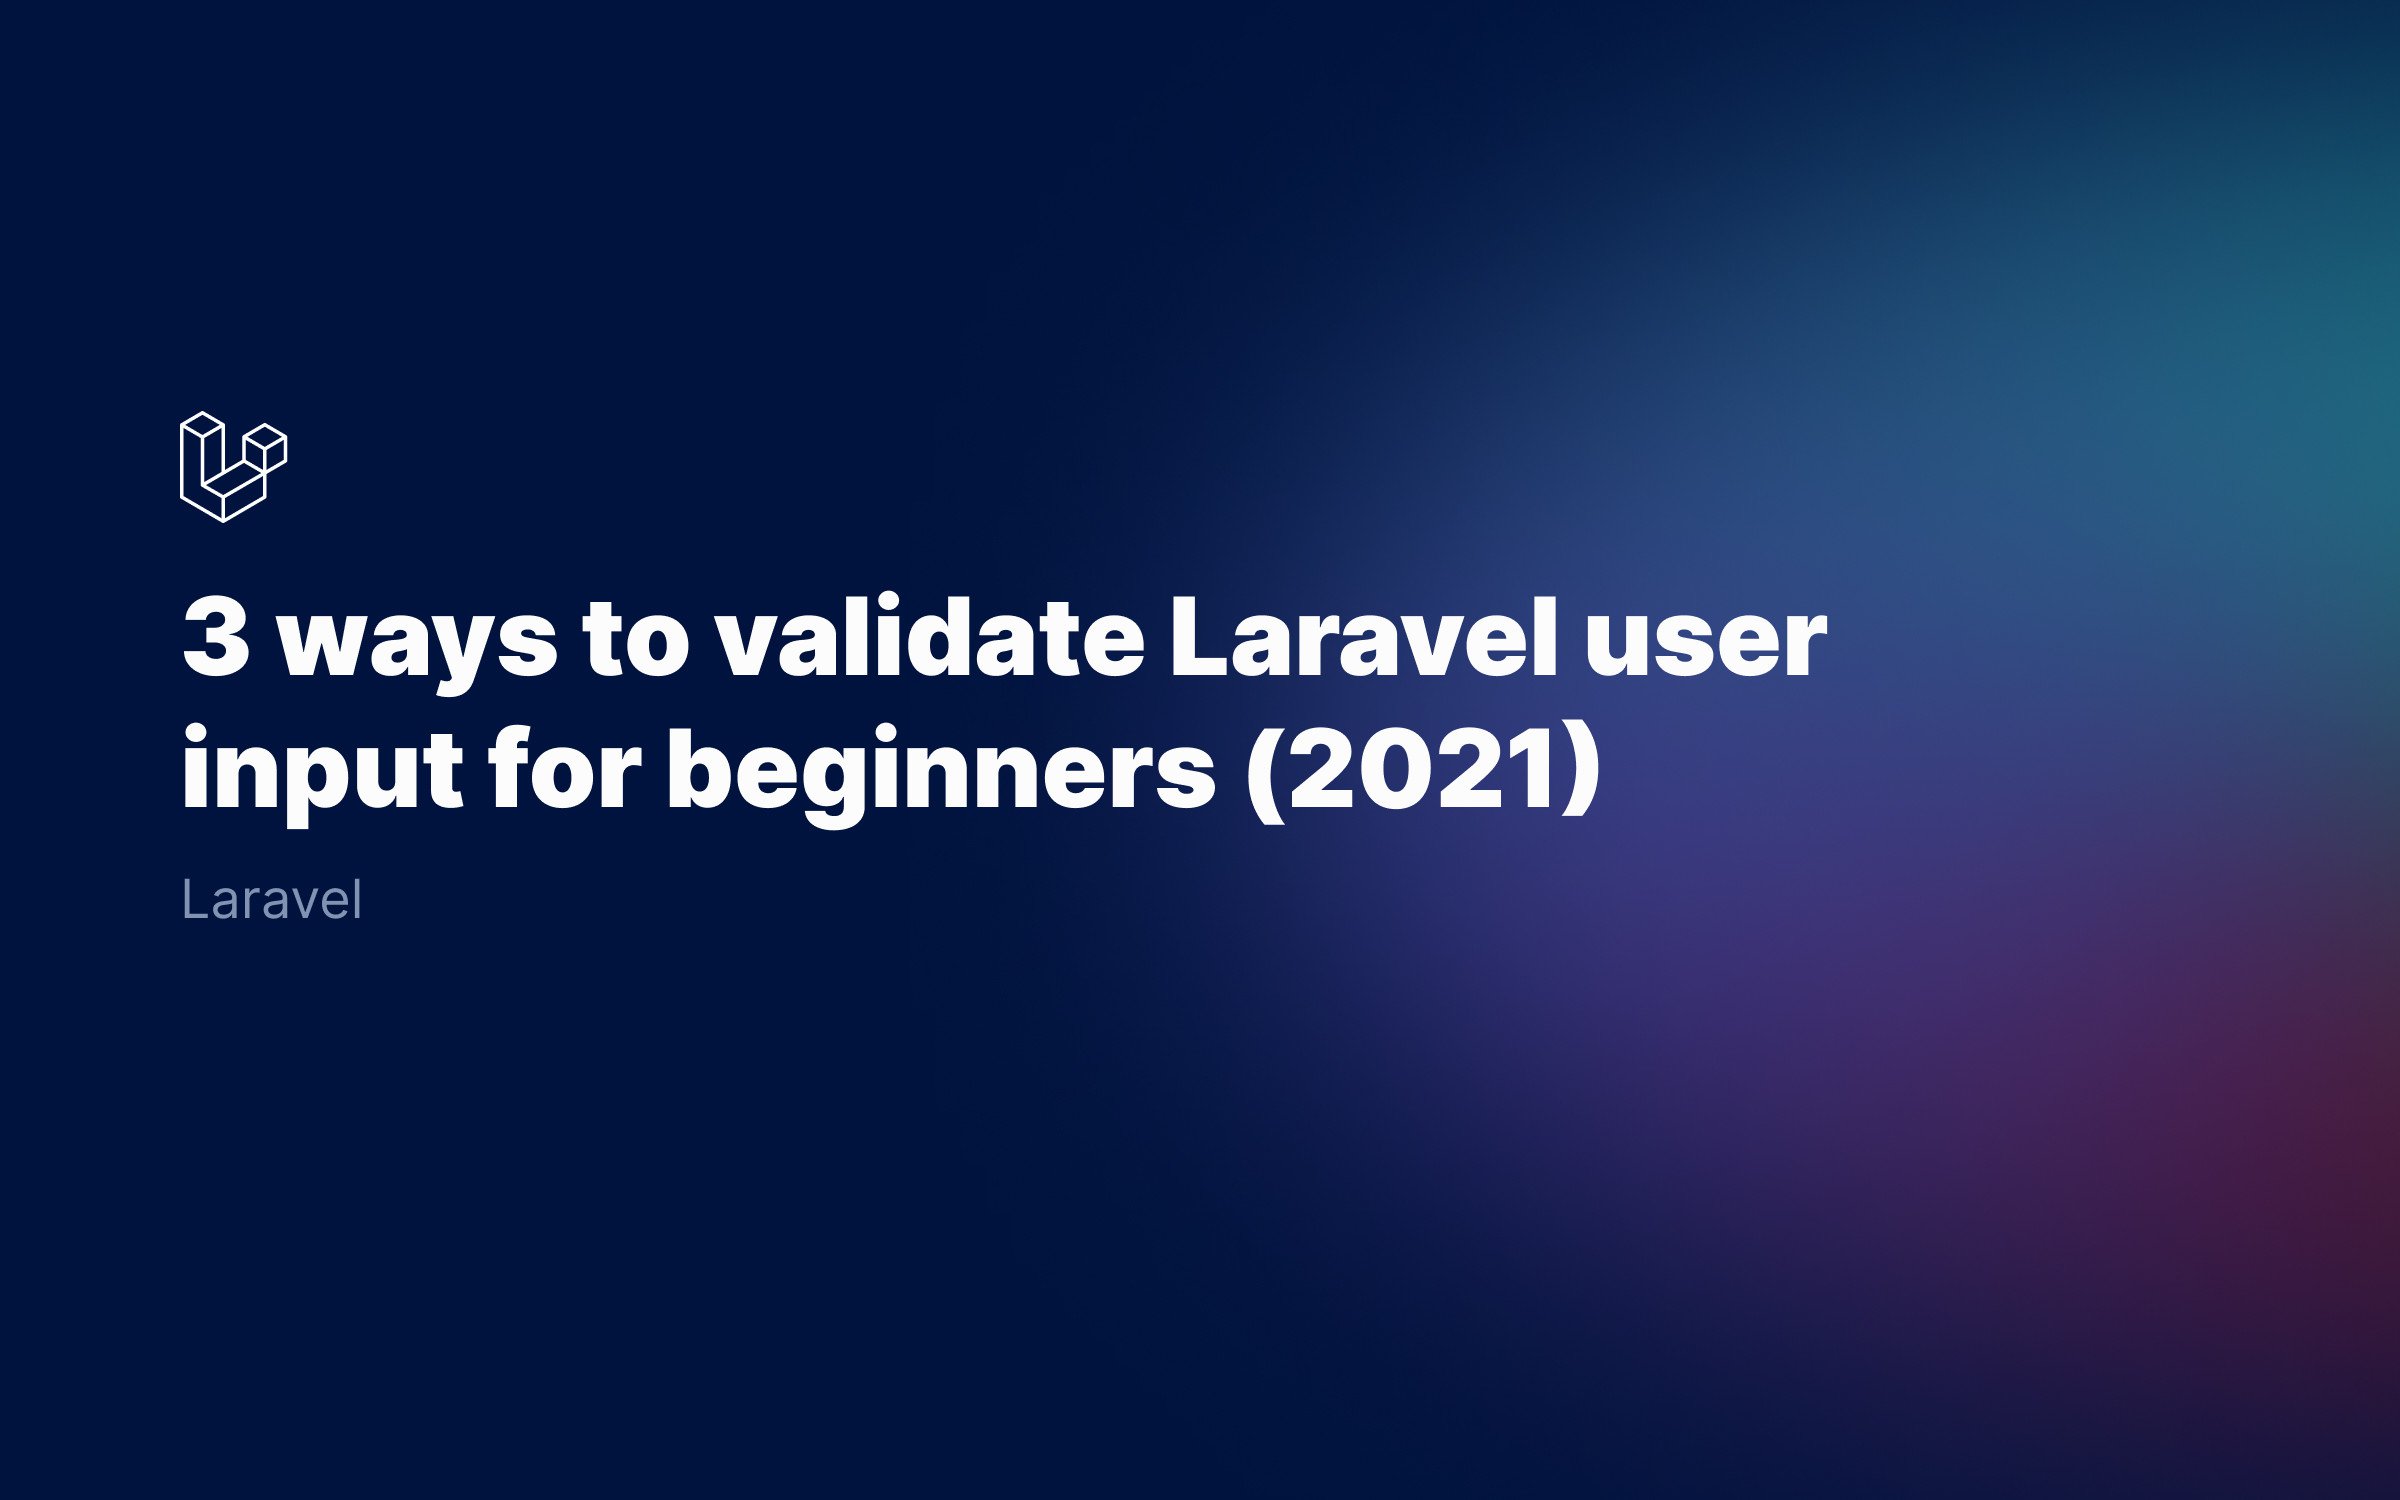 How to validate Laravel user input for beginners (2021)